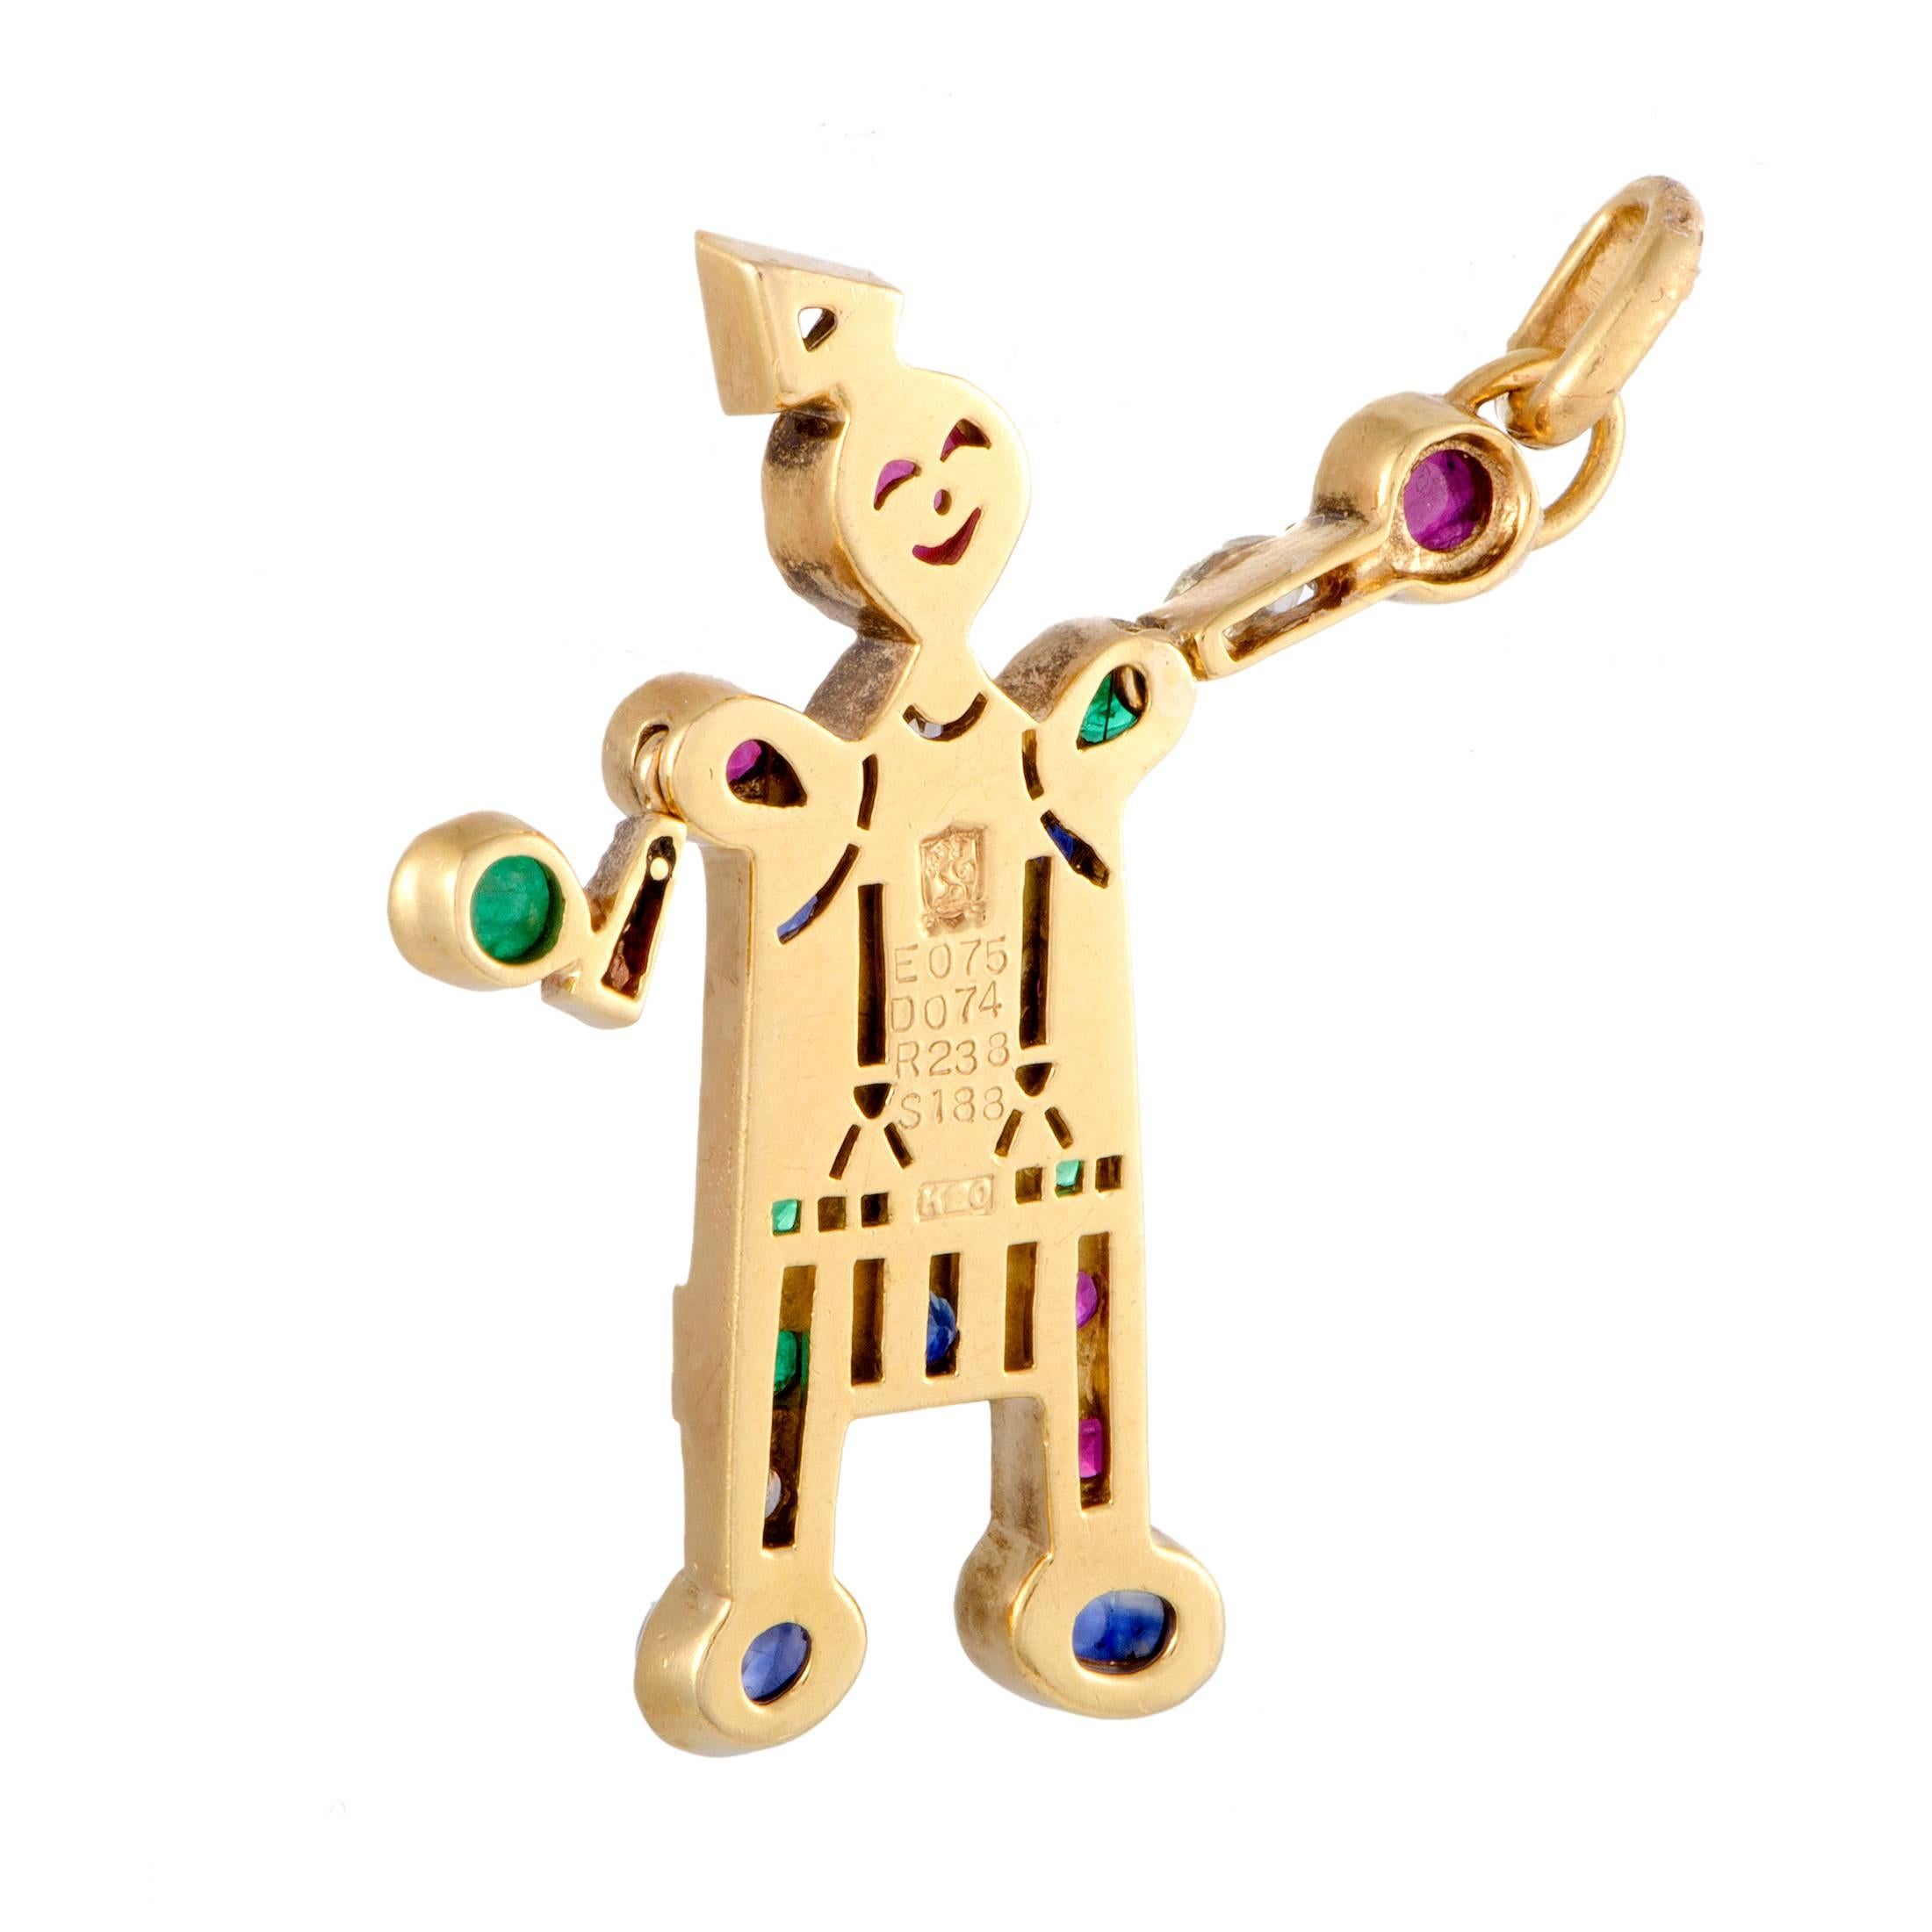 Endearingly vibrant, this gorgeous pendant is made of radiant 20K yellow gold and depicts a playful clown. The pendant is set with a plethora of colorful gems – 2.38 carats of rubies, 0.75 carats of emeralds, 1.88 carats of sapphires and 0.74 carats